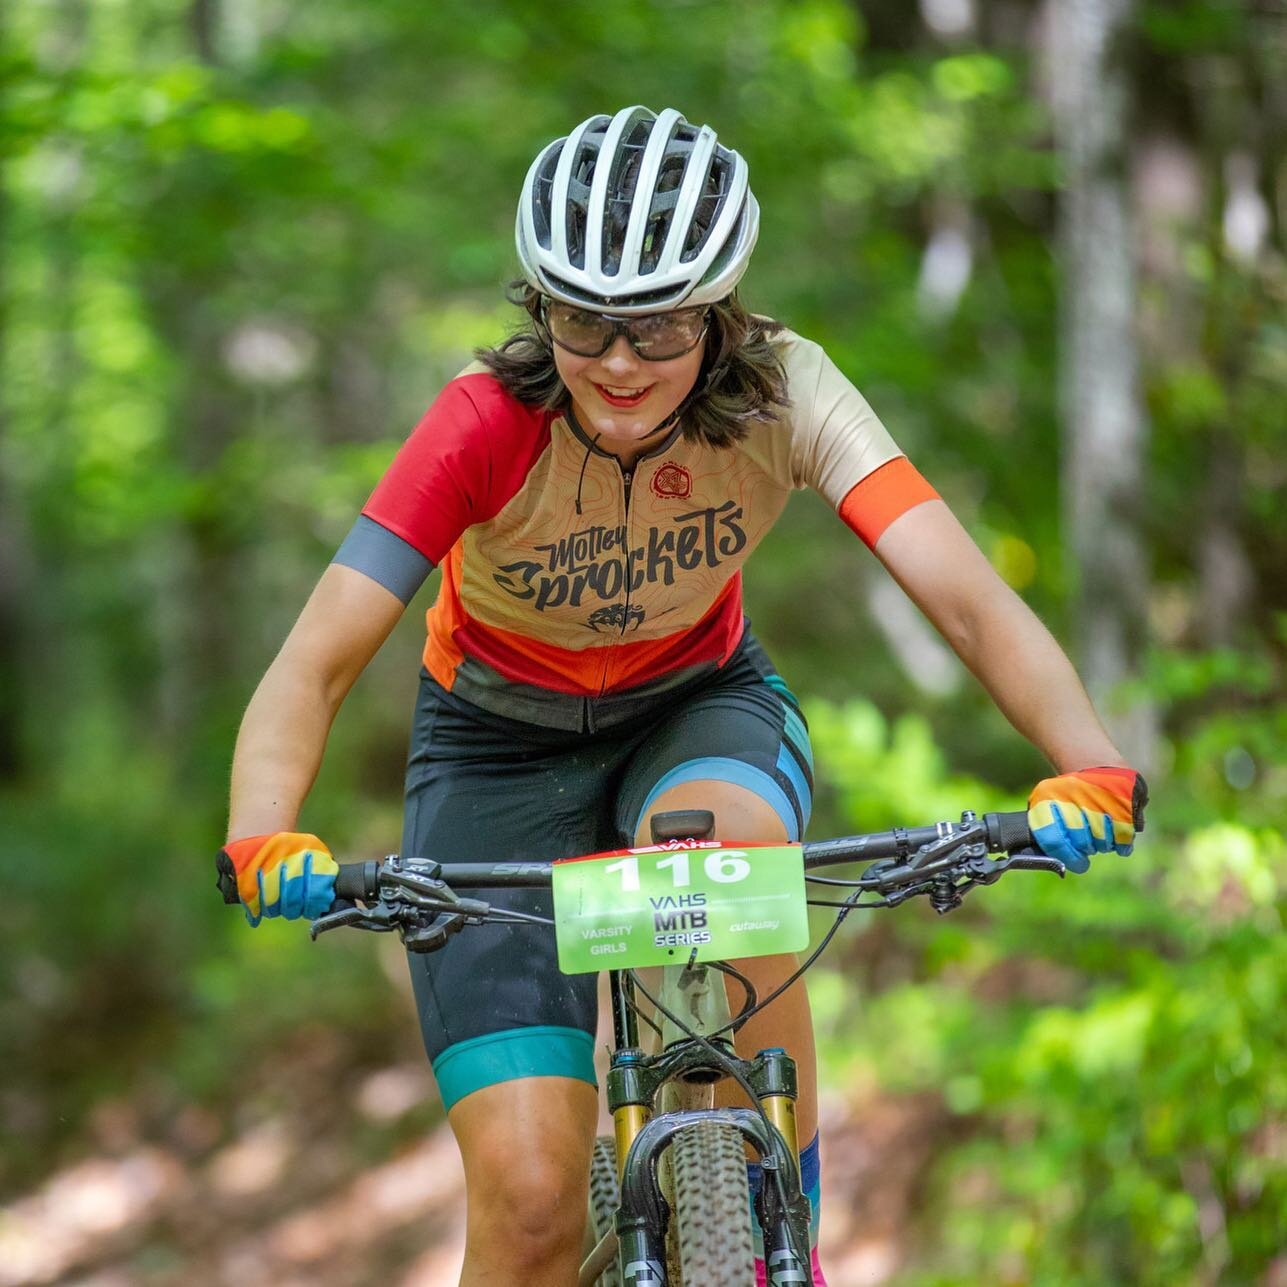 Love riding bikes? Not sure racing is for you? Come learn about Motley Sprockets Youth Mountain Bike Team. Racing is only part of what we do. We are a volunteer-run, 501c3 non-profit, co-ed mountain bike team for riders of all skill levels in grades 